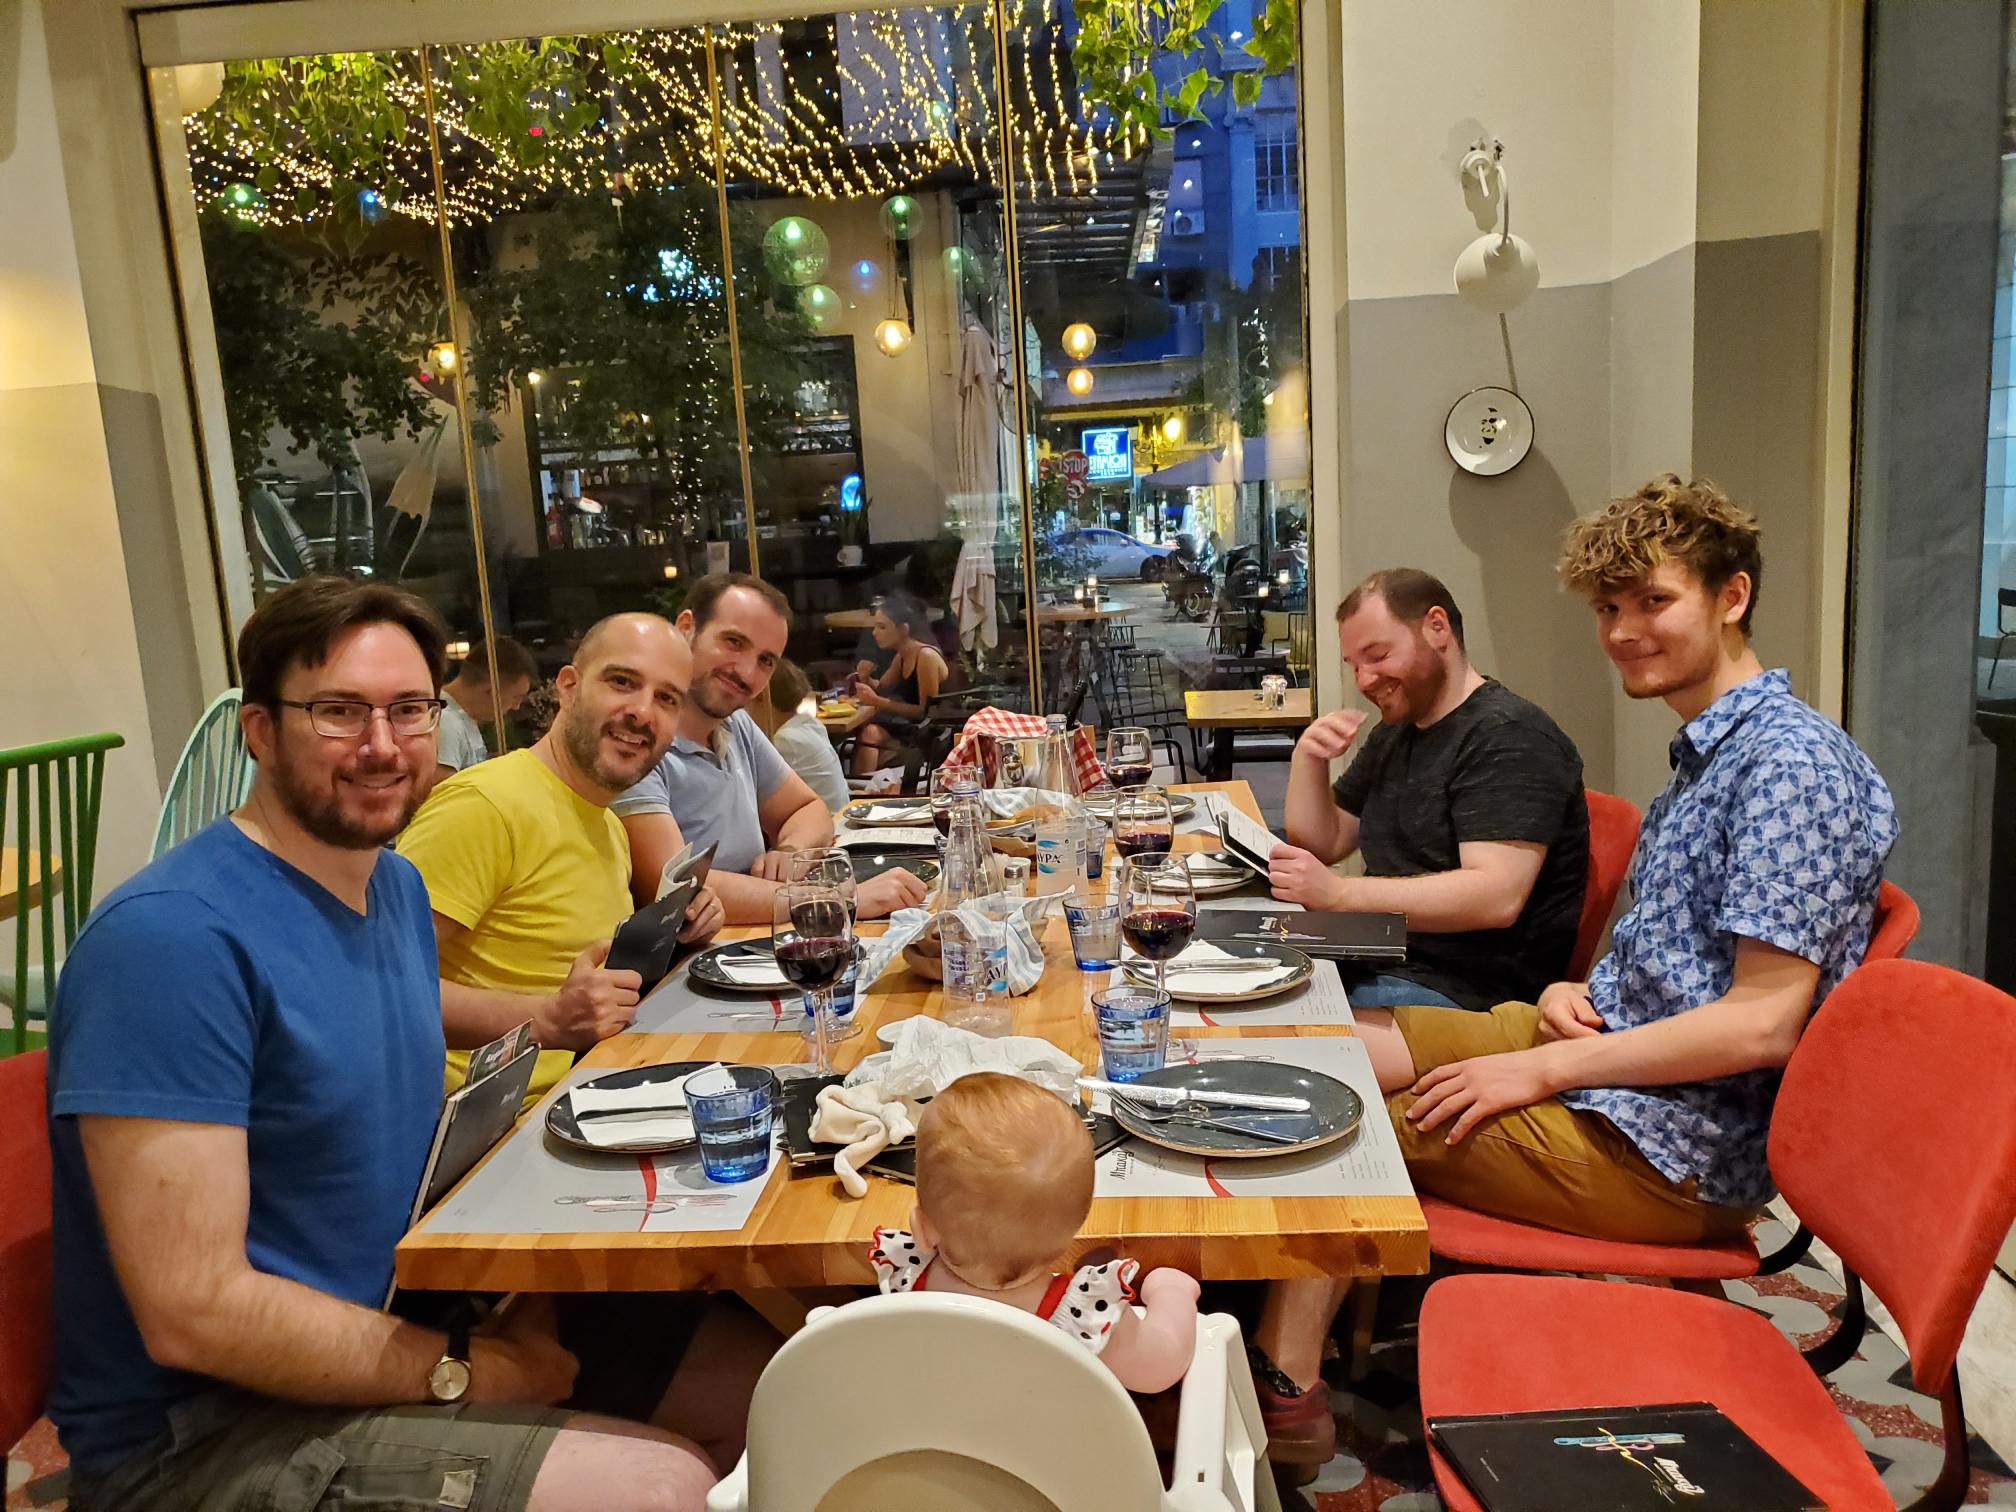 Purism team members sitting around a dinner table at a restaurant